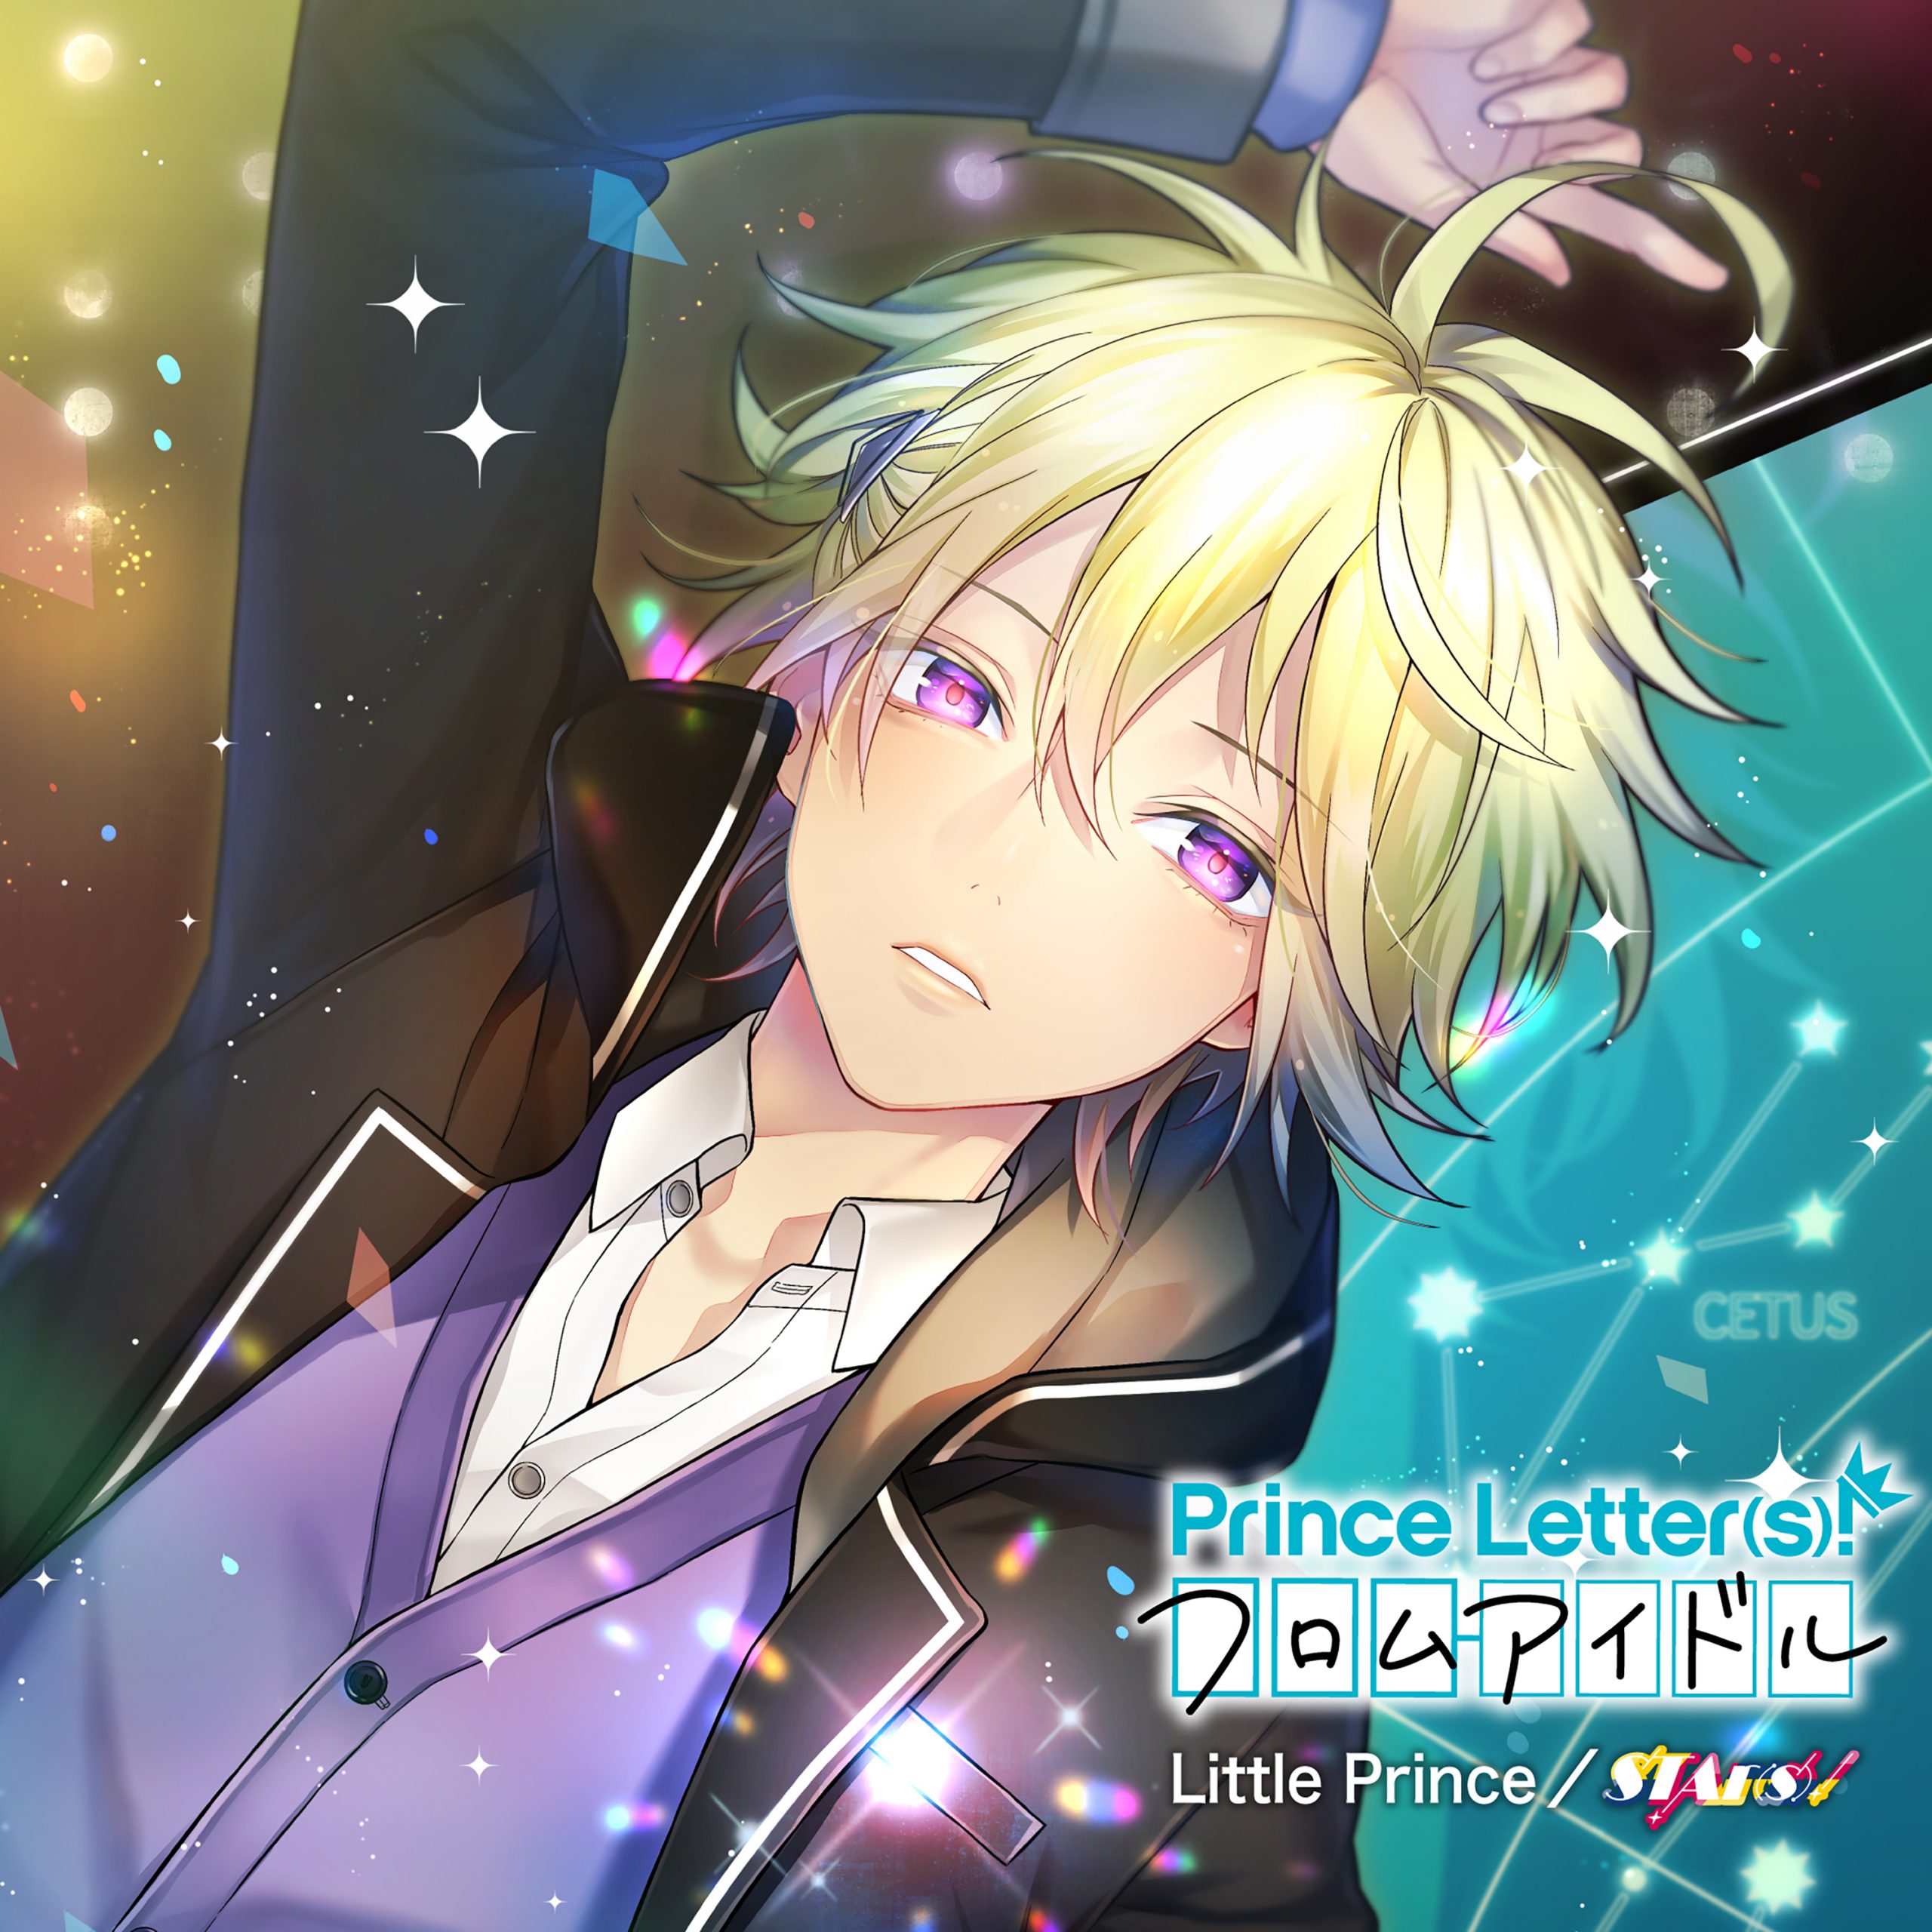 Little Prince | MUSIC(s)! | Prince Letter(s)! フロムアイドル - プリンス 